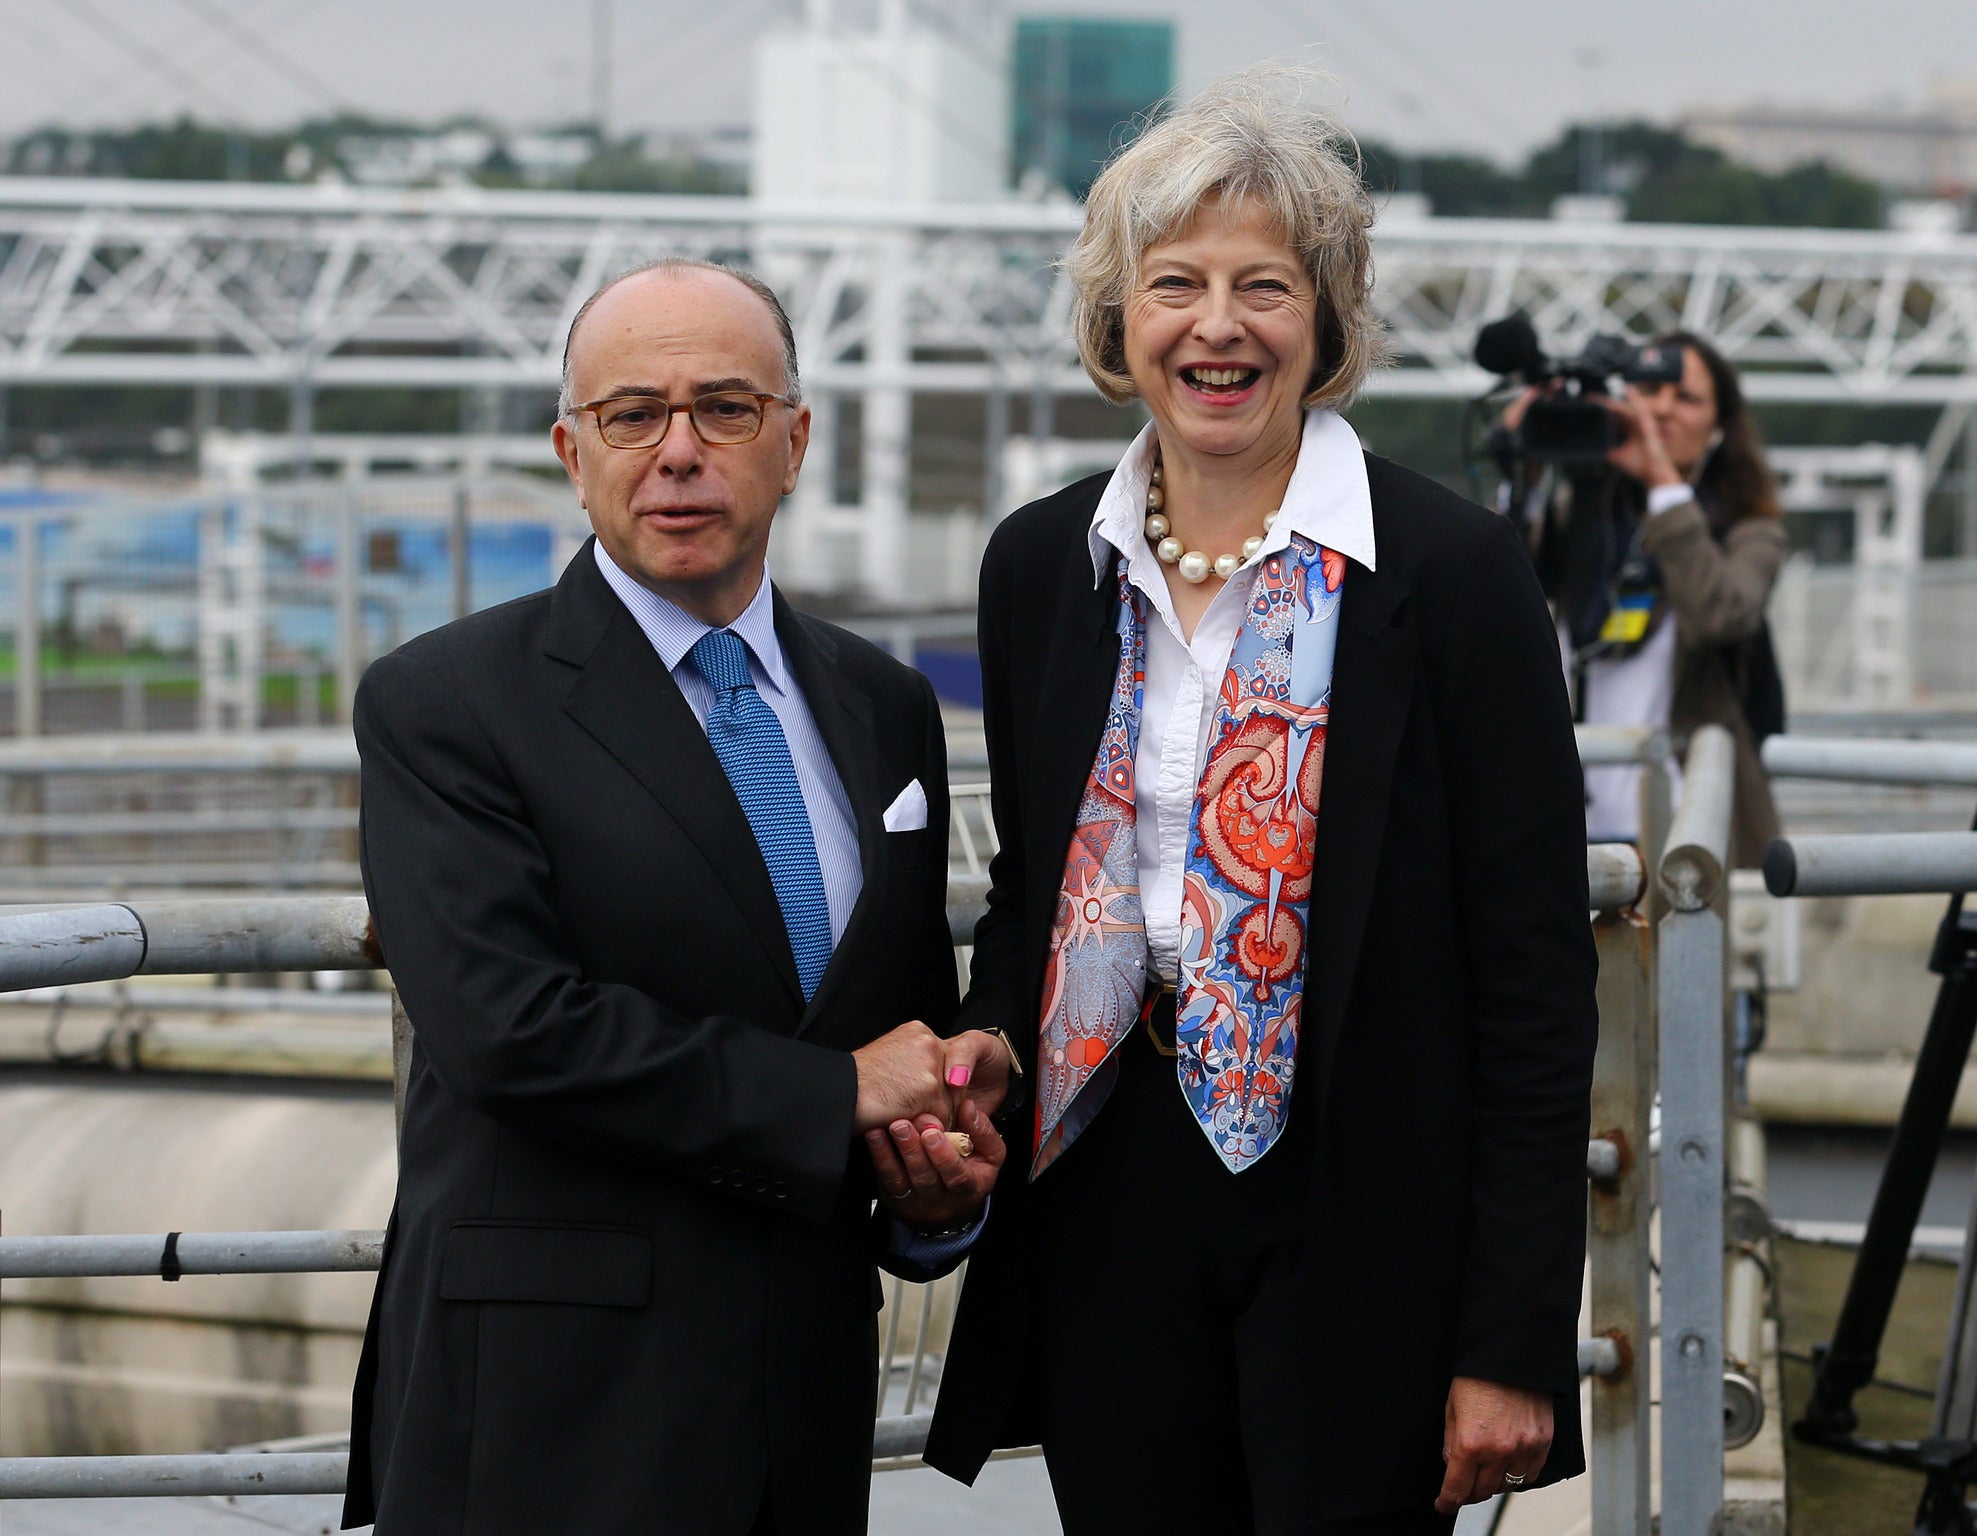 Theresa May, the Home Secretary, meets French Interior Minister Bernard Cazeneuve in Calais to sign a new deal to alleviate the migrant crisis engulfing the town